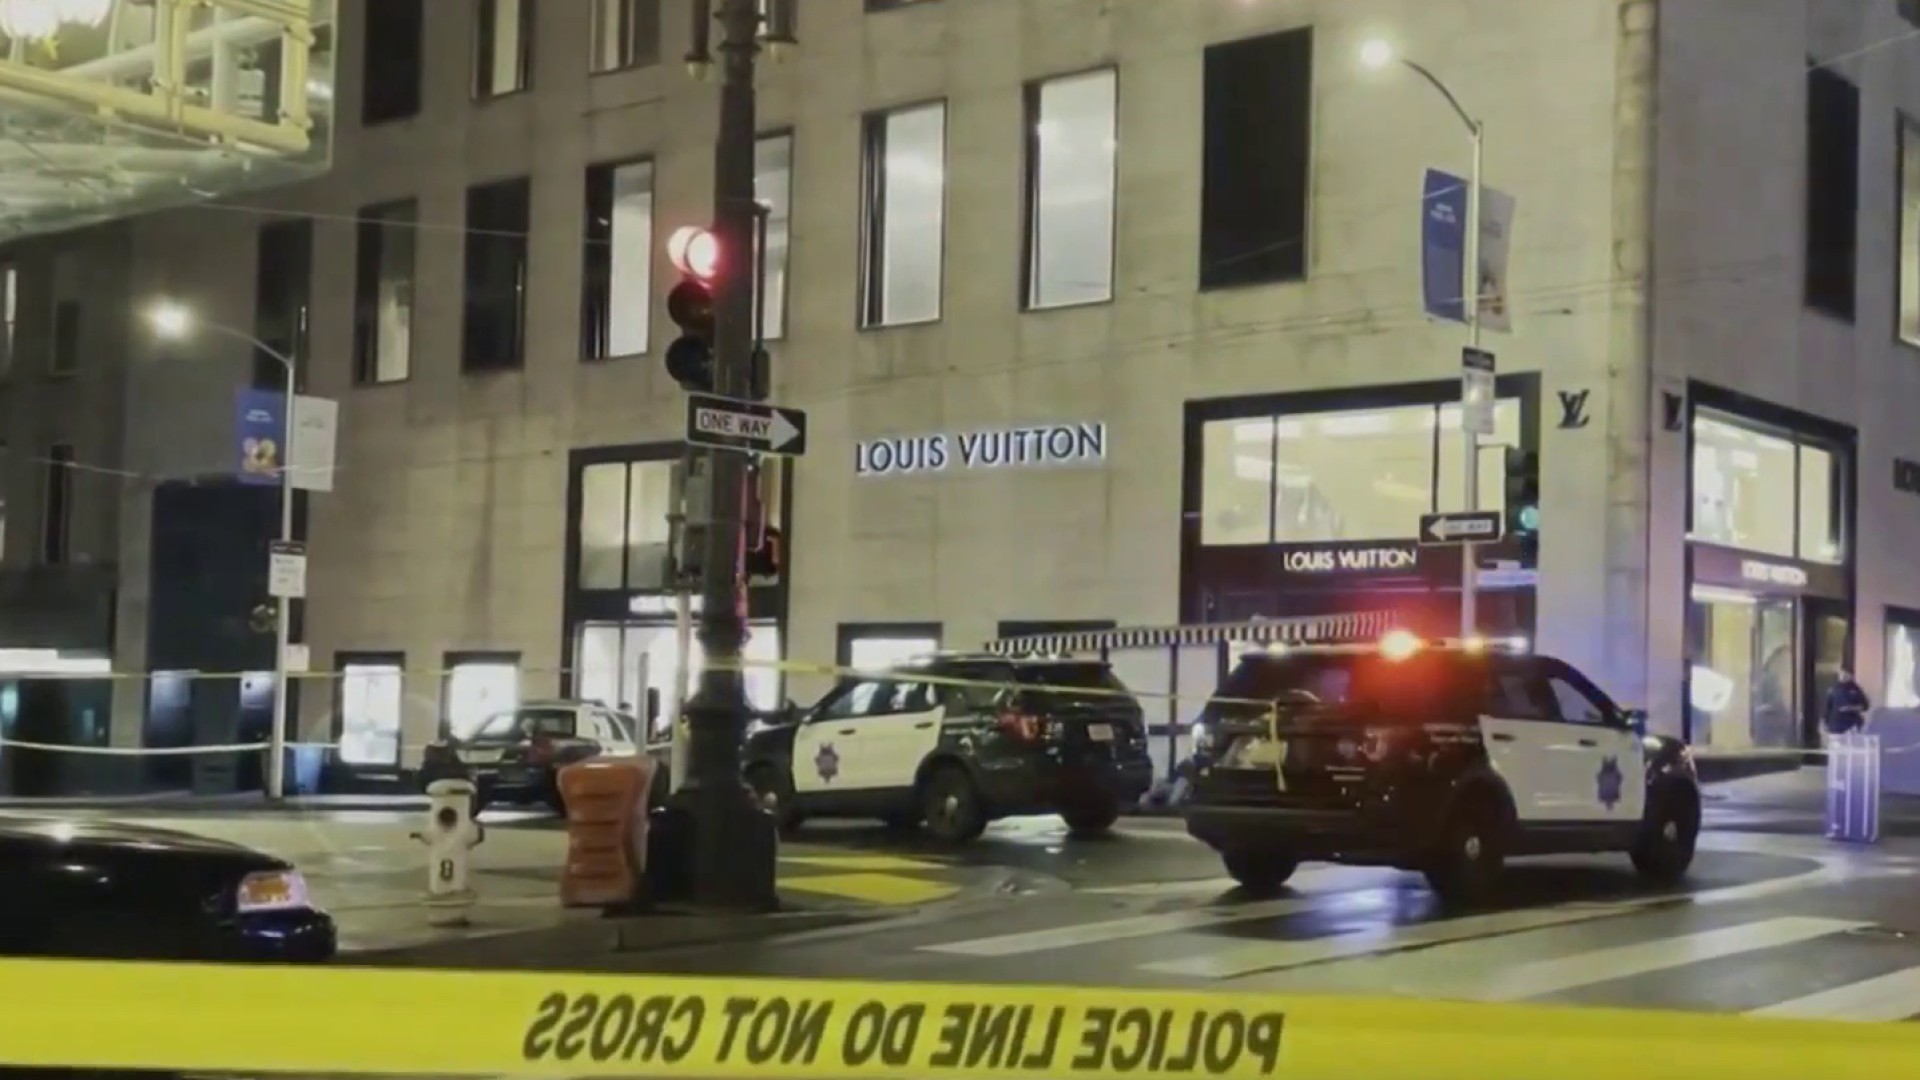 Oak Brook Illinois Louis Vuitton 14 people rushed into a store outside  Chicago and ran out with at least 100000 in merchandise police say  CNN